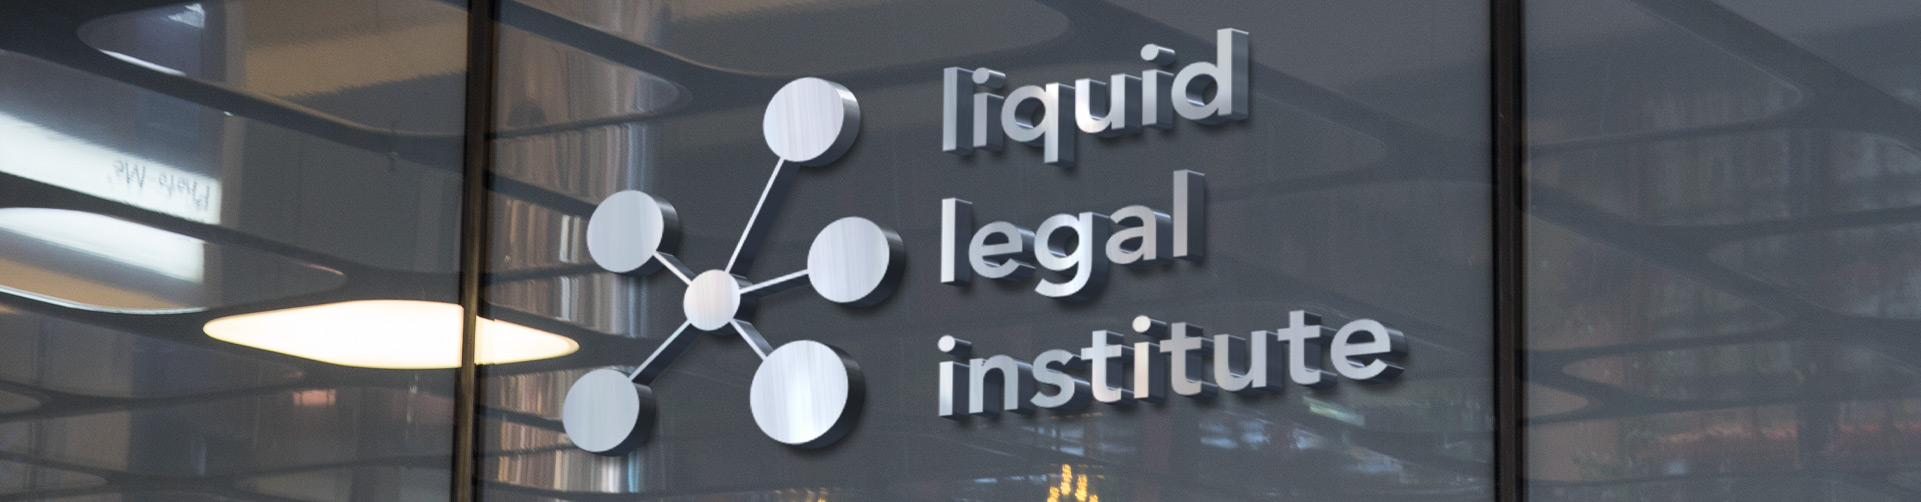 photo of iron company logo of liquid legal institute on a wall